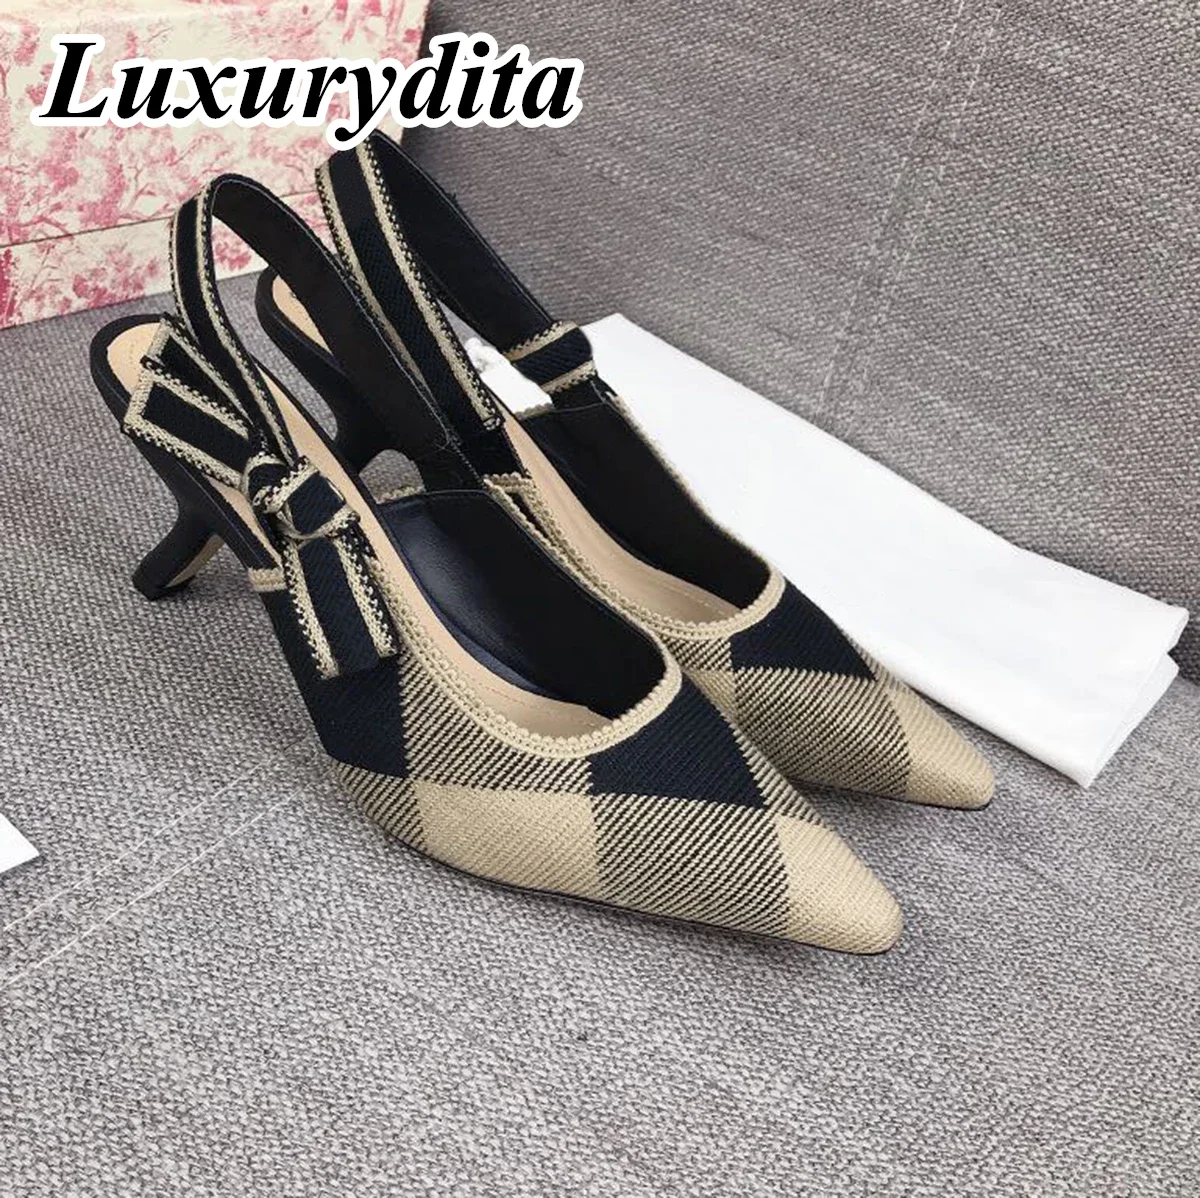 

LUXURYDITA Luxury Womens High Heel Sandal Casual Lace Fashion Embroidered Muller Flat Shoes Designer Silk Leather Soled XY295